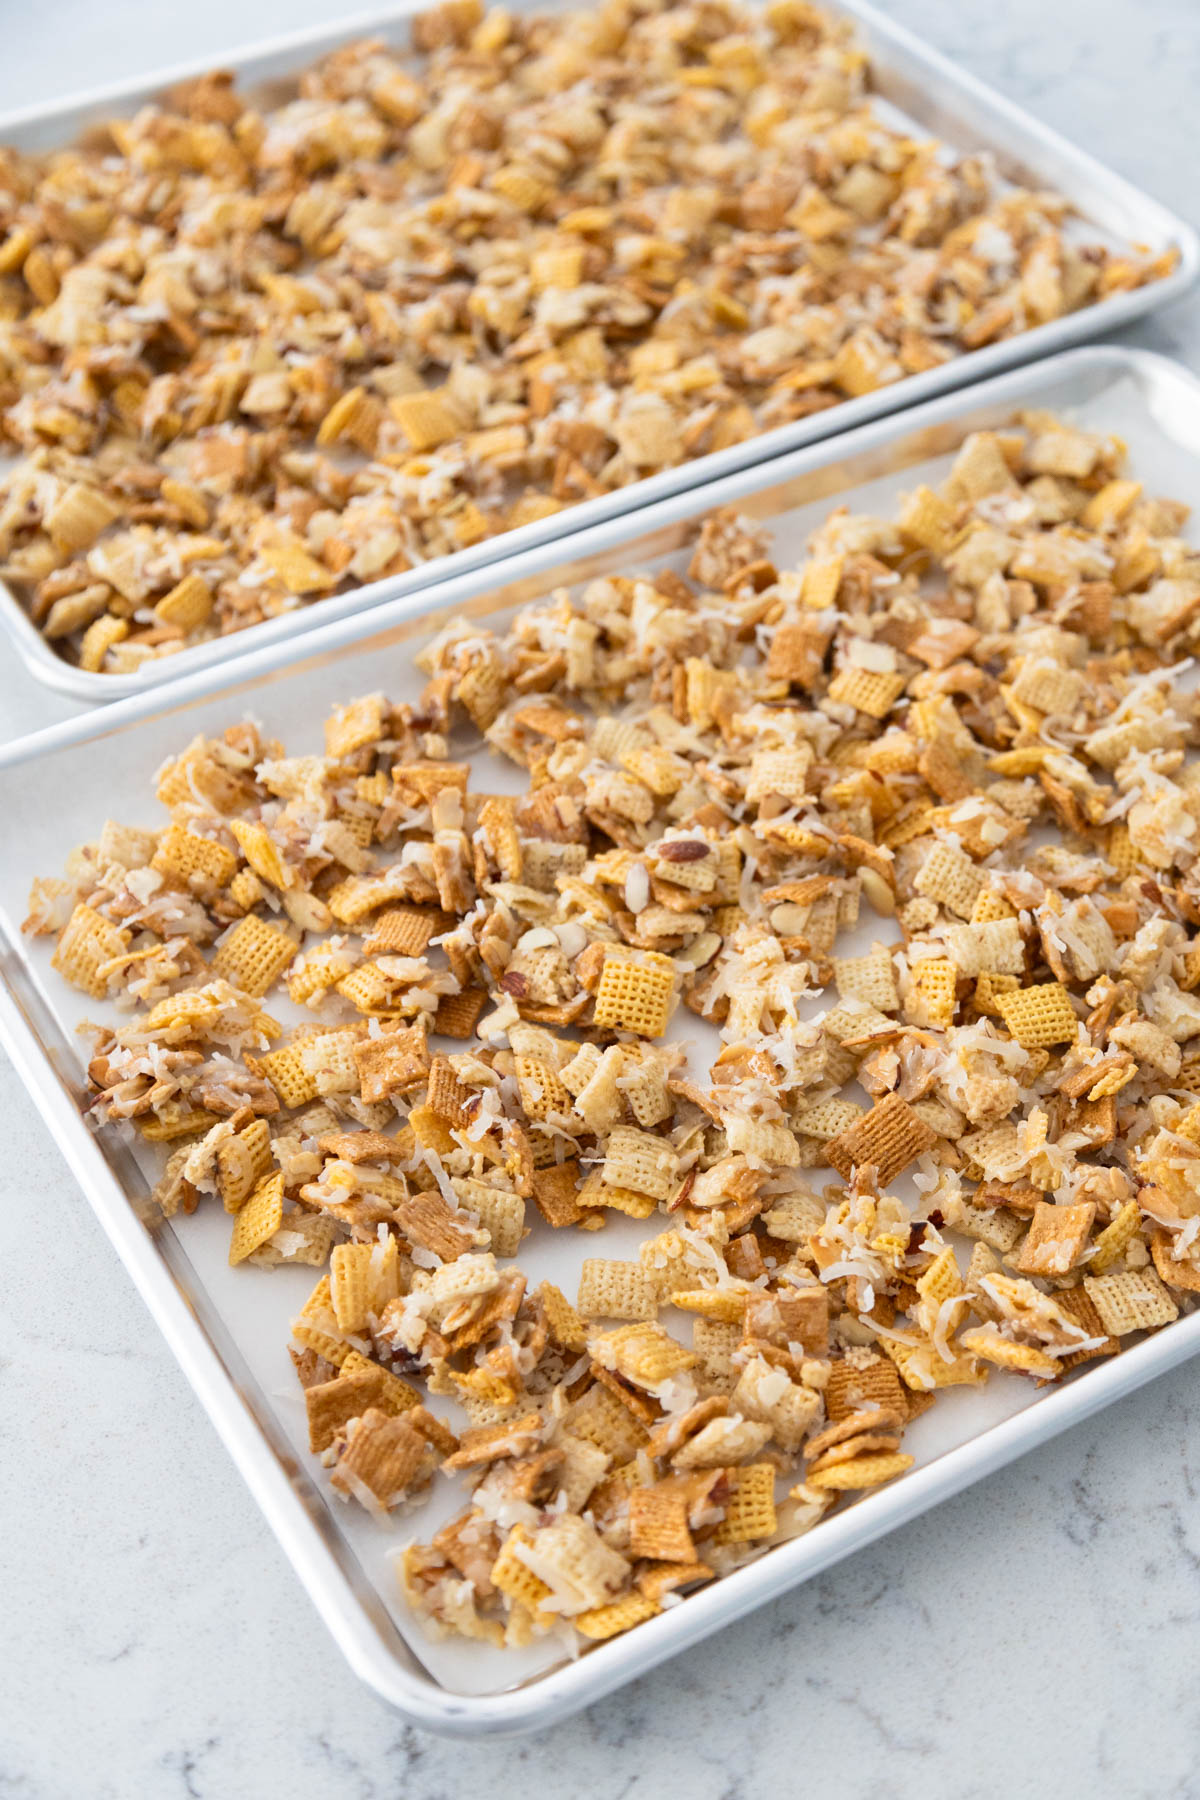 The Chex Mix has finished cooling on the large baking sheets and is ready to be served.